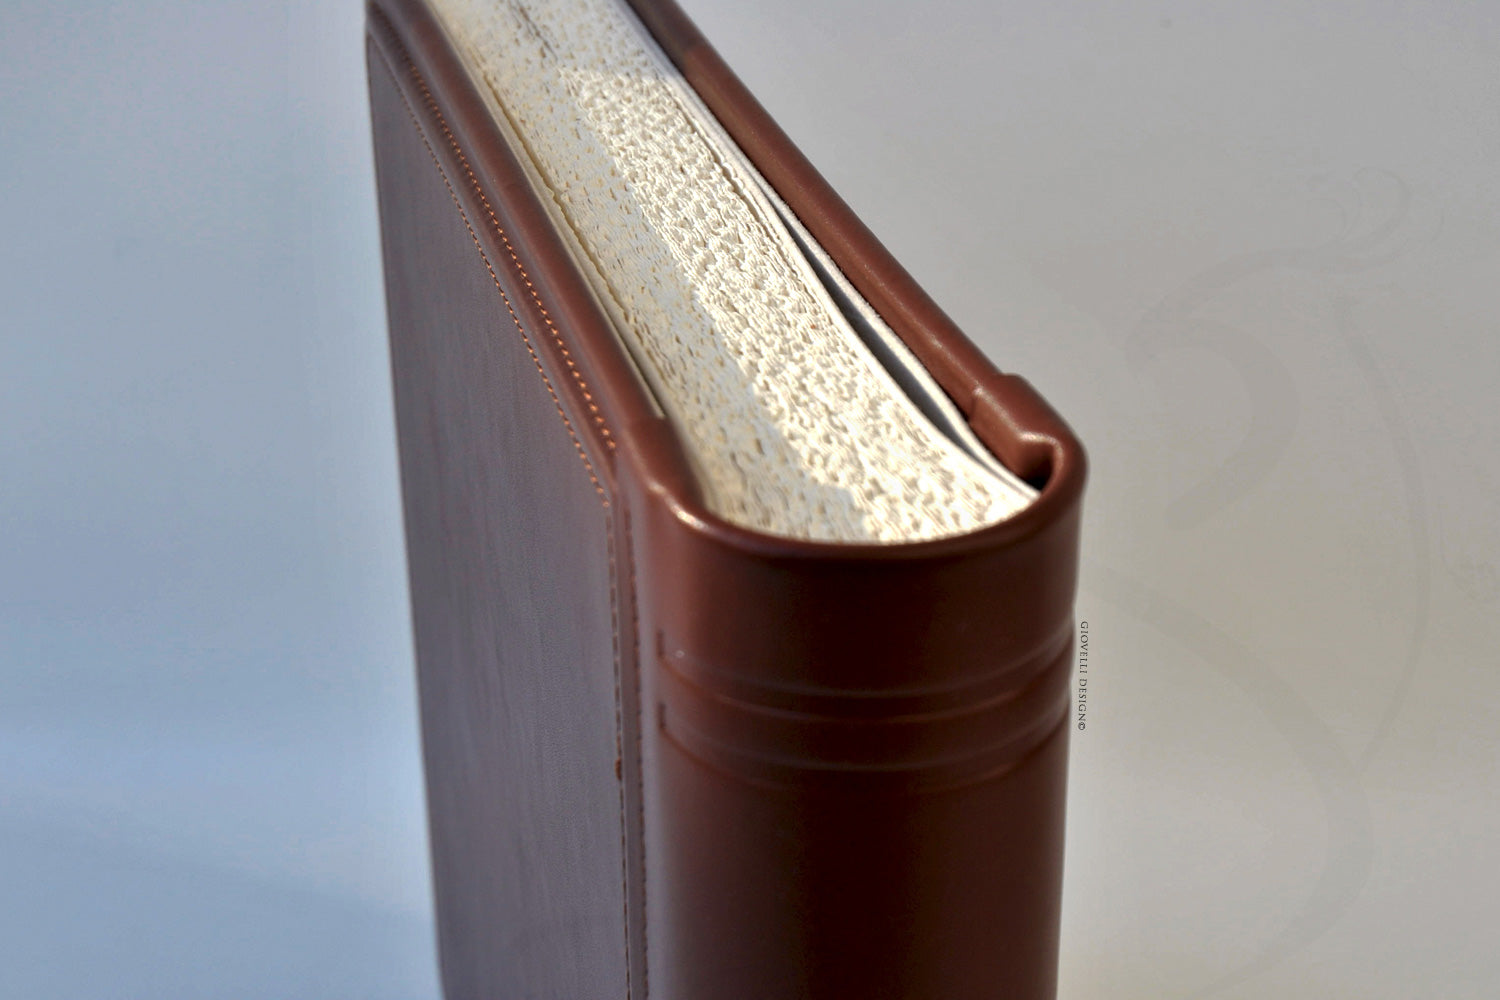 Charming Personalizable Large Leather Photo Album 13,7 x 13,7